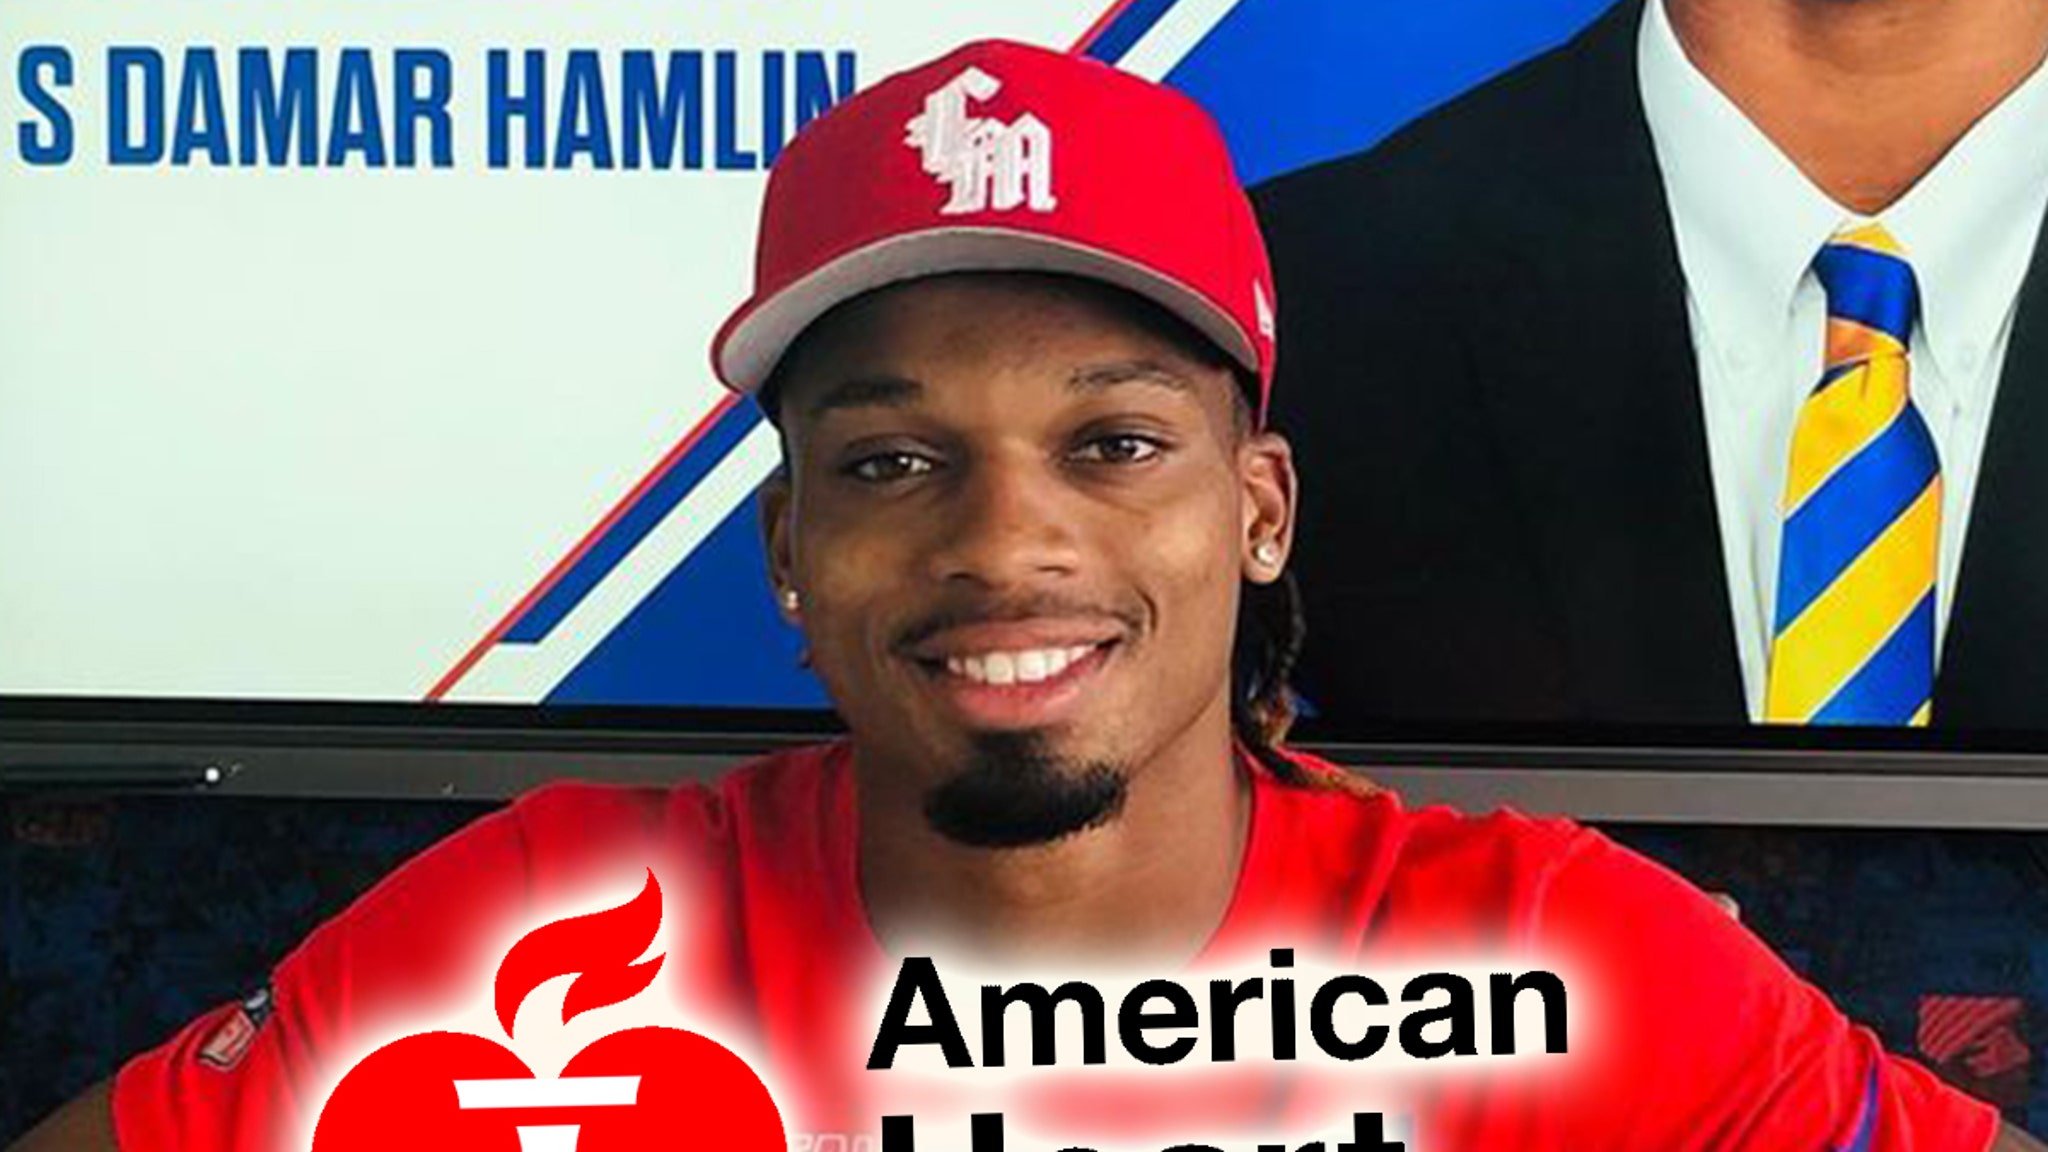 Damar Hamlin Partners With American Heart Association To Promote CPR Training